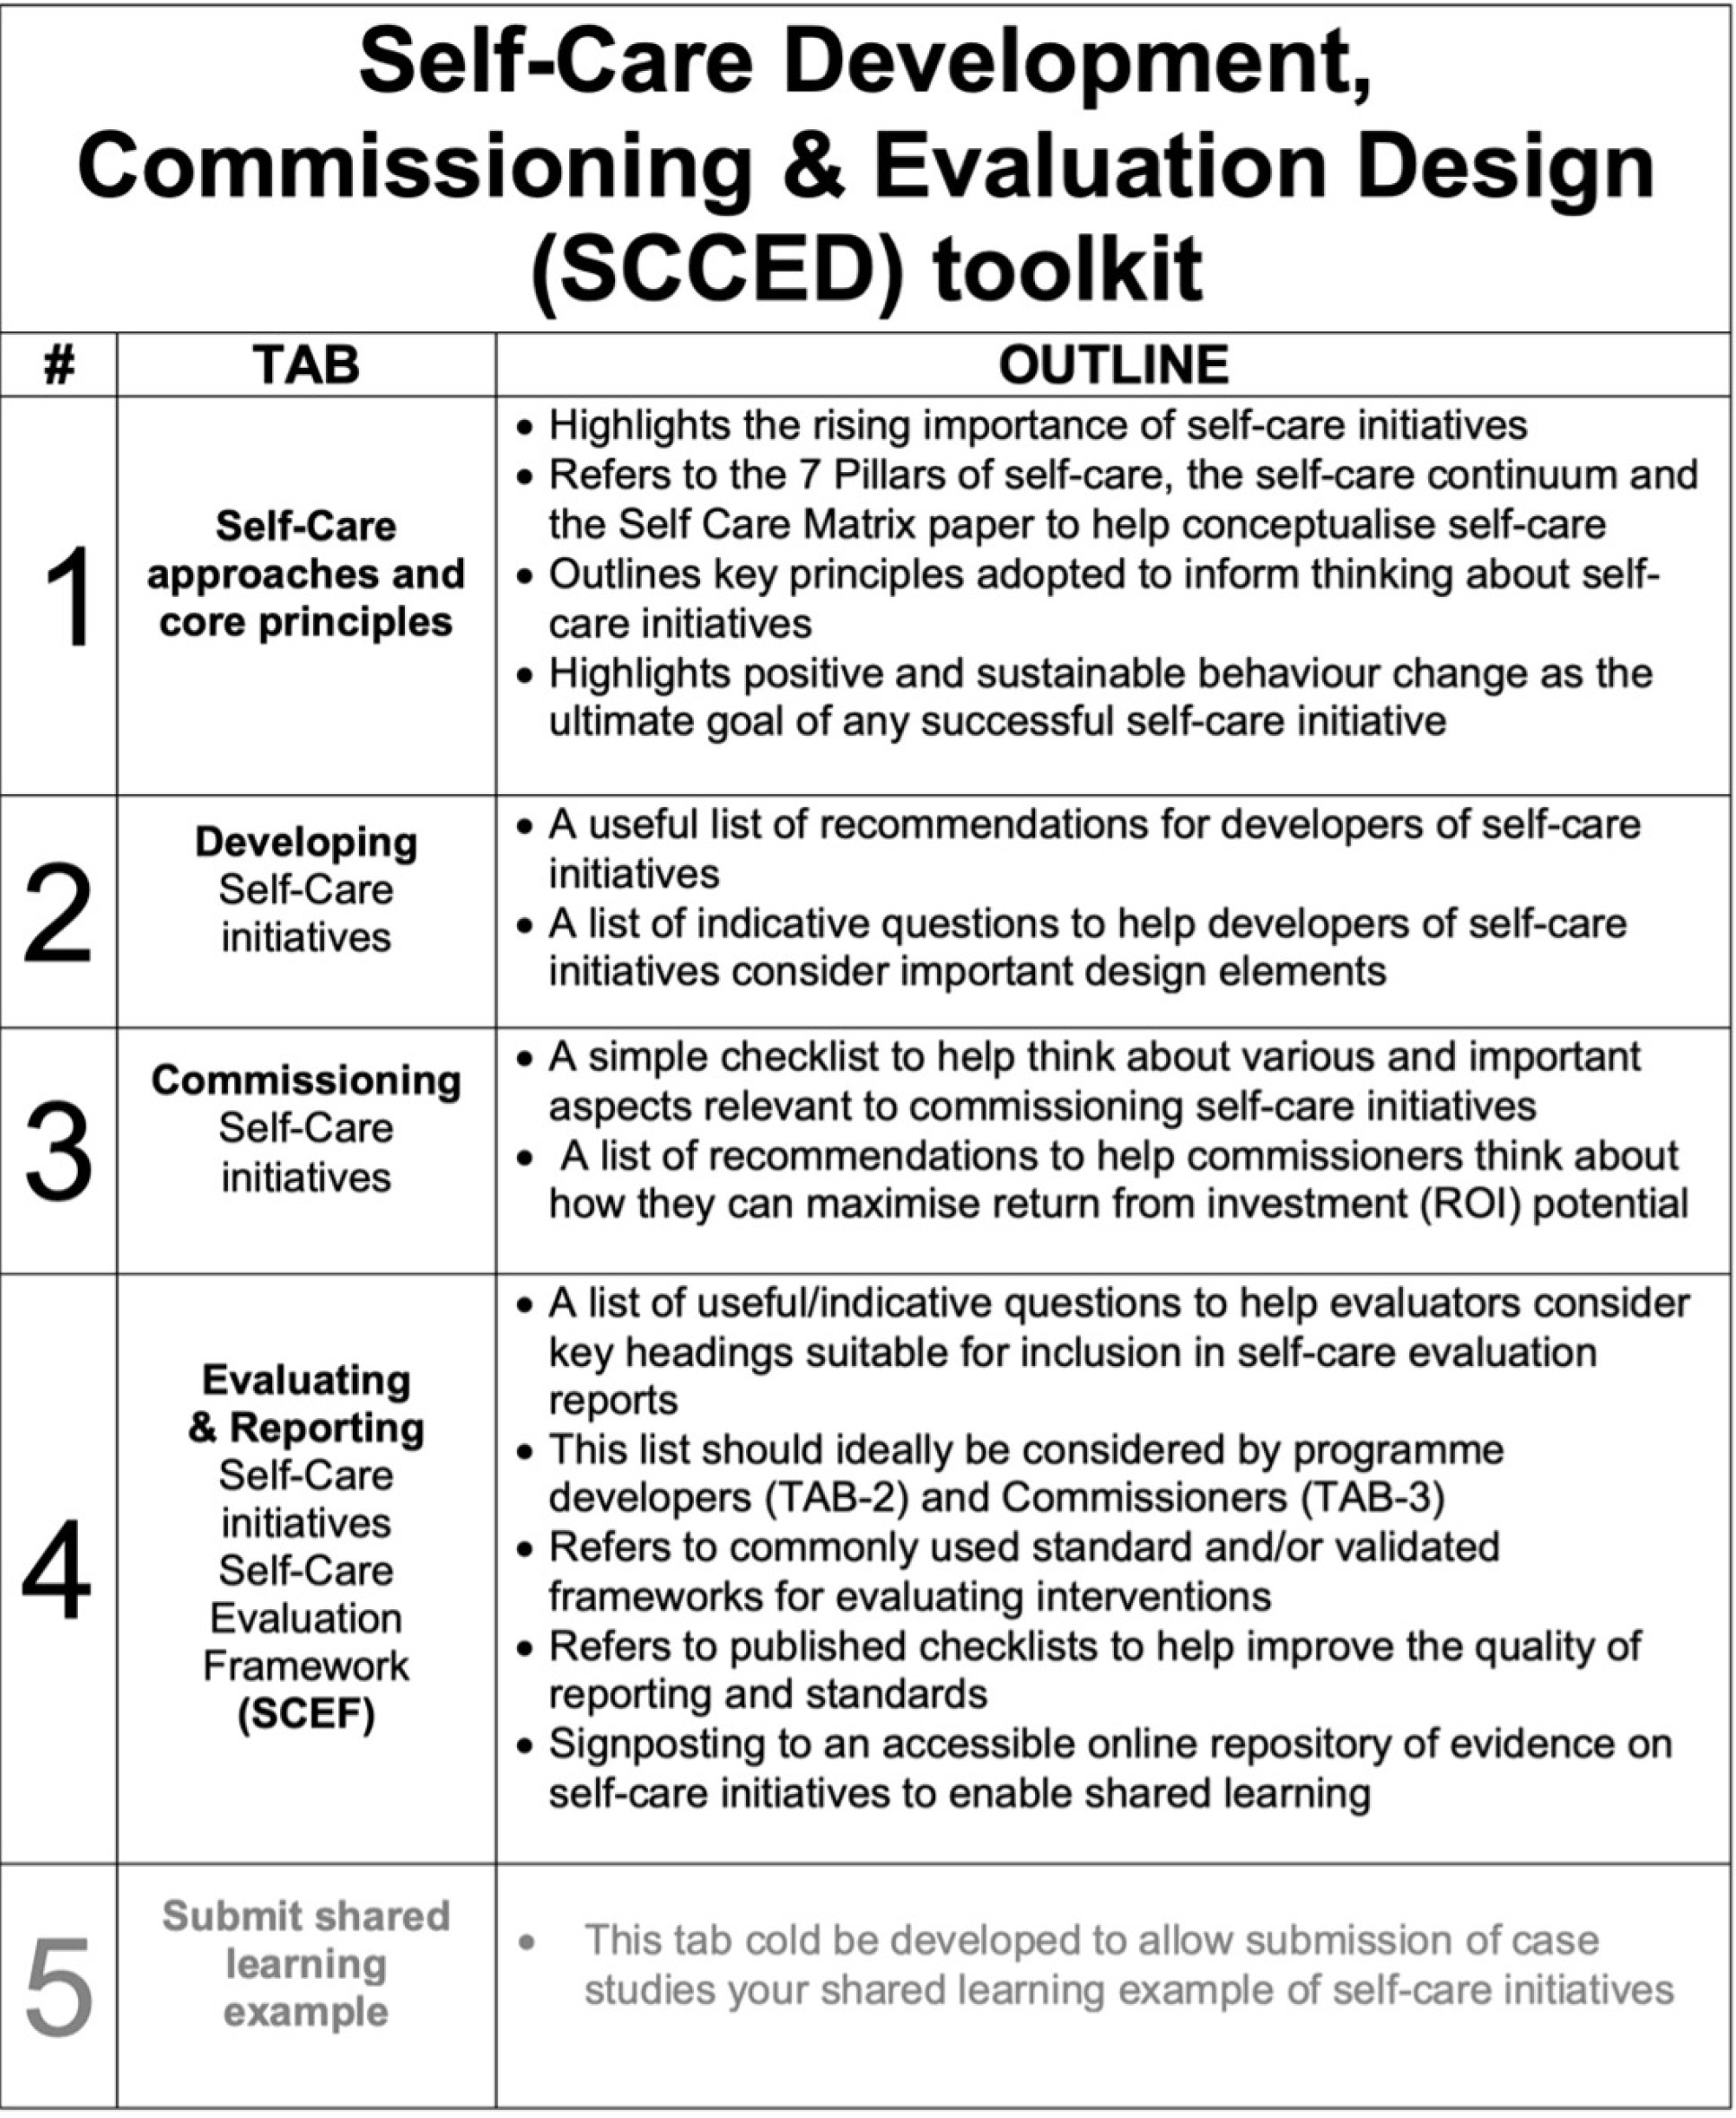 SCCED toolkit